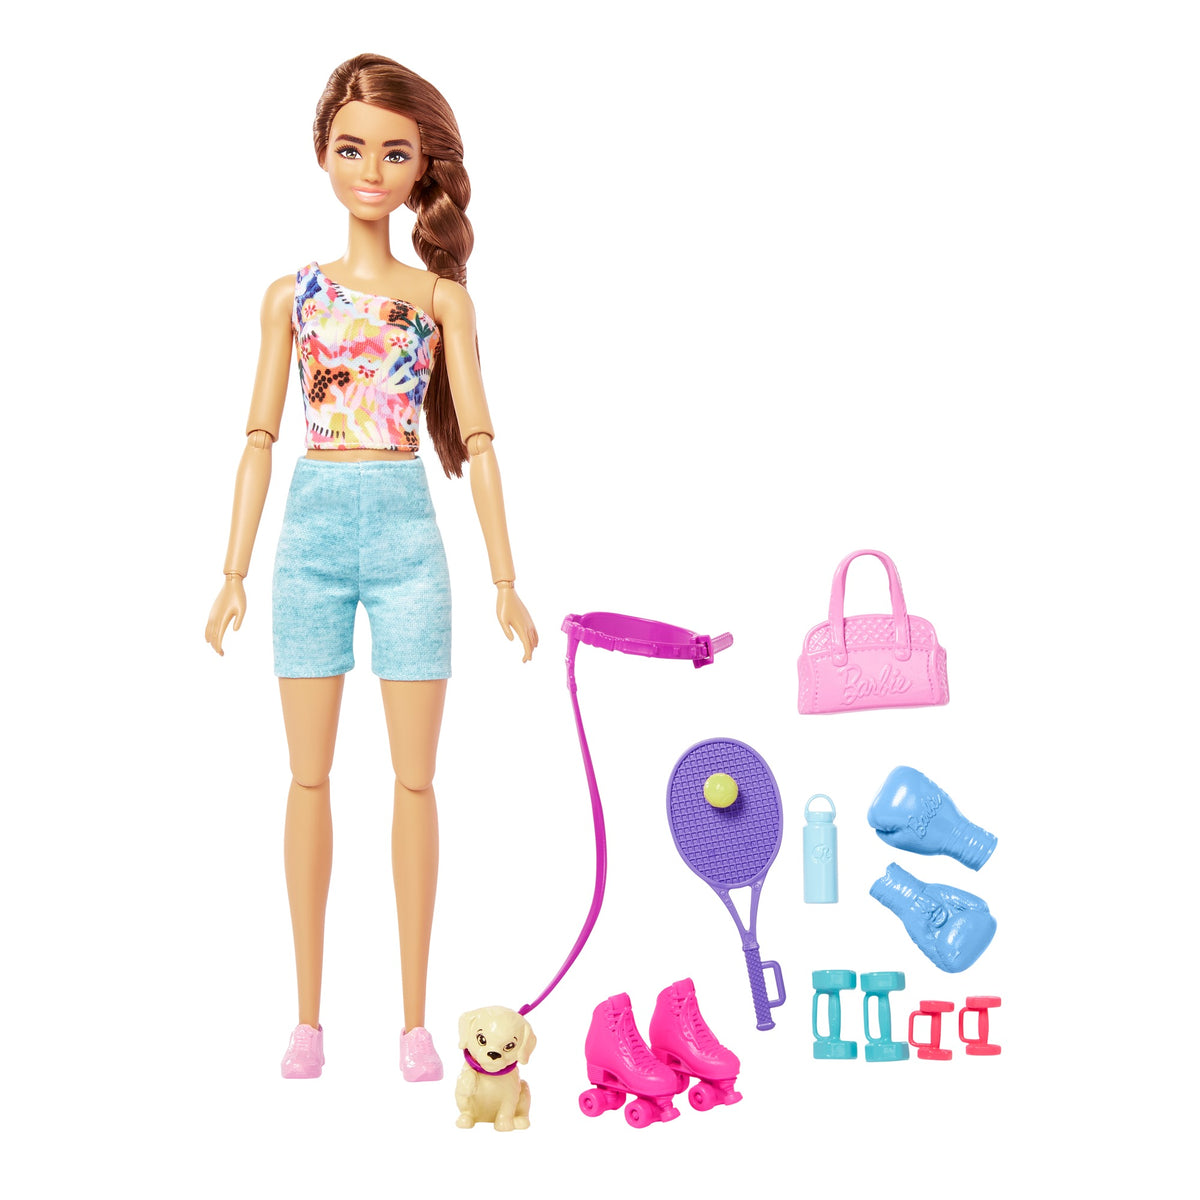 Barbie Wellness Doll Playset with Brunette Doll with Pet Puppy, Barbie Sets, Workout Theme with Accessories, Self-Care Series, Roller Skates and Tennis for Kids Ages 3+